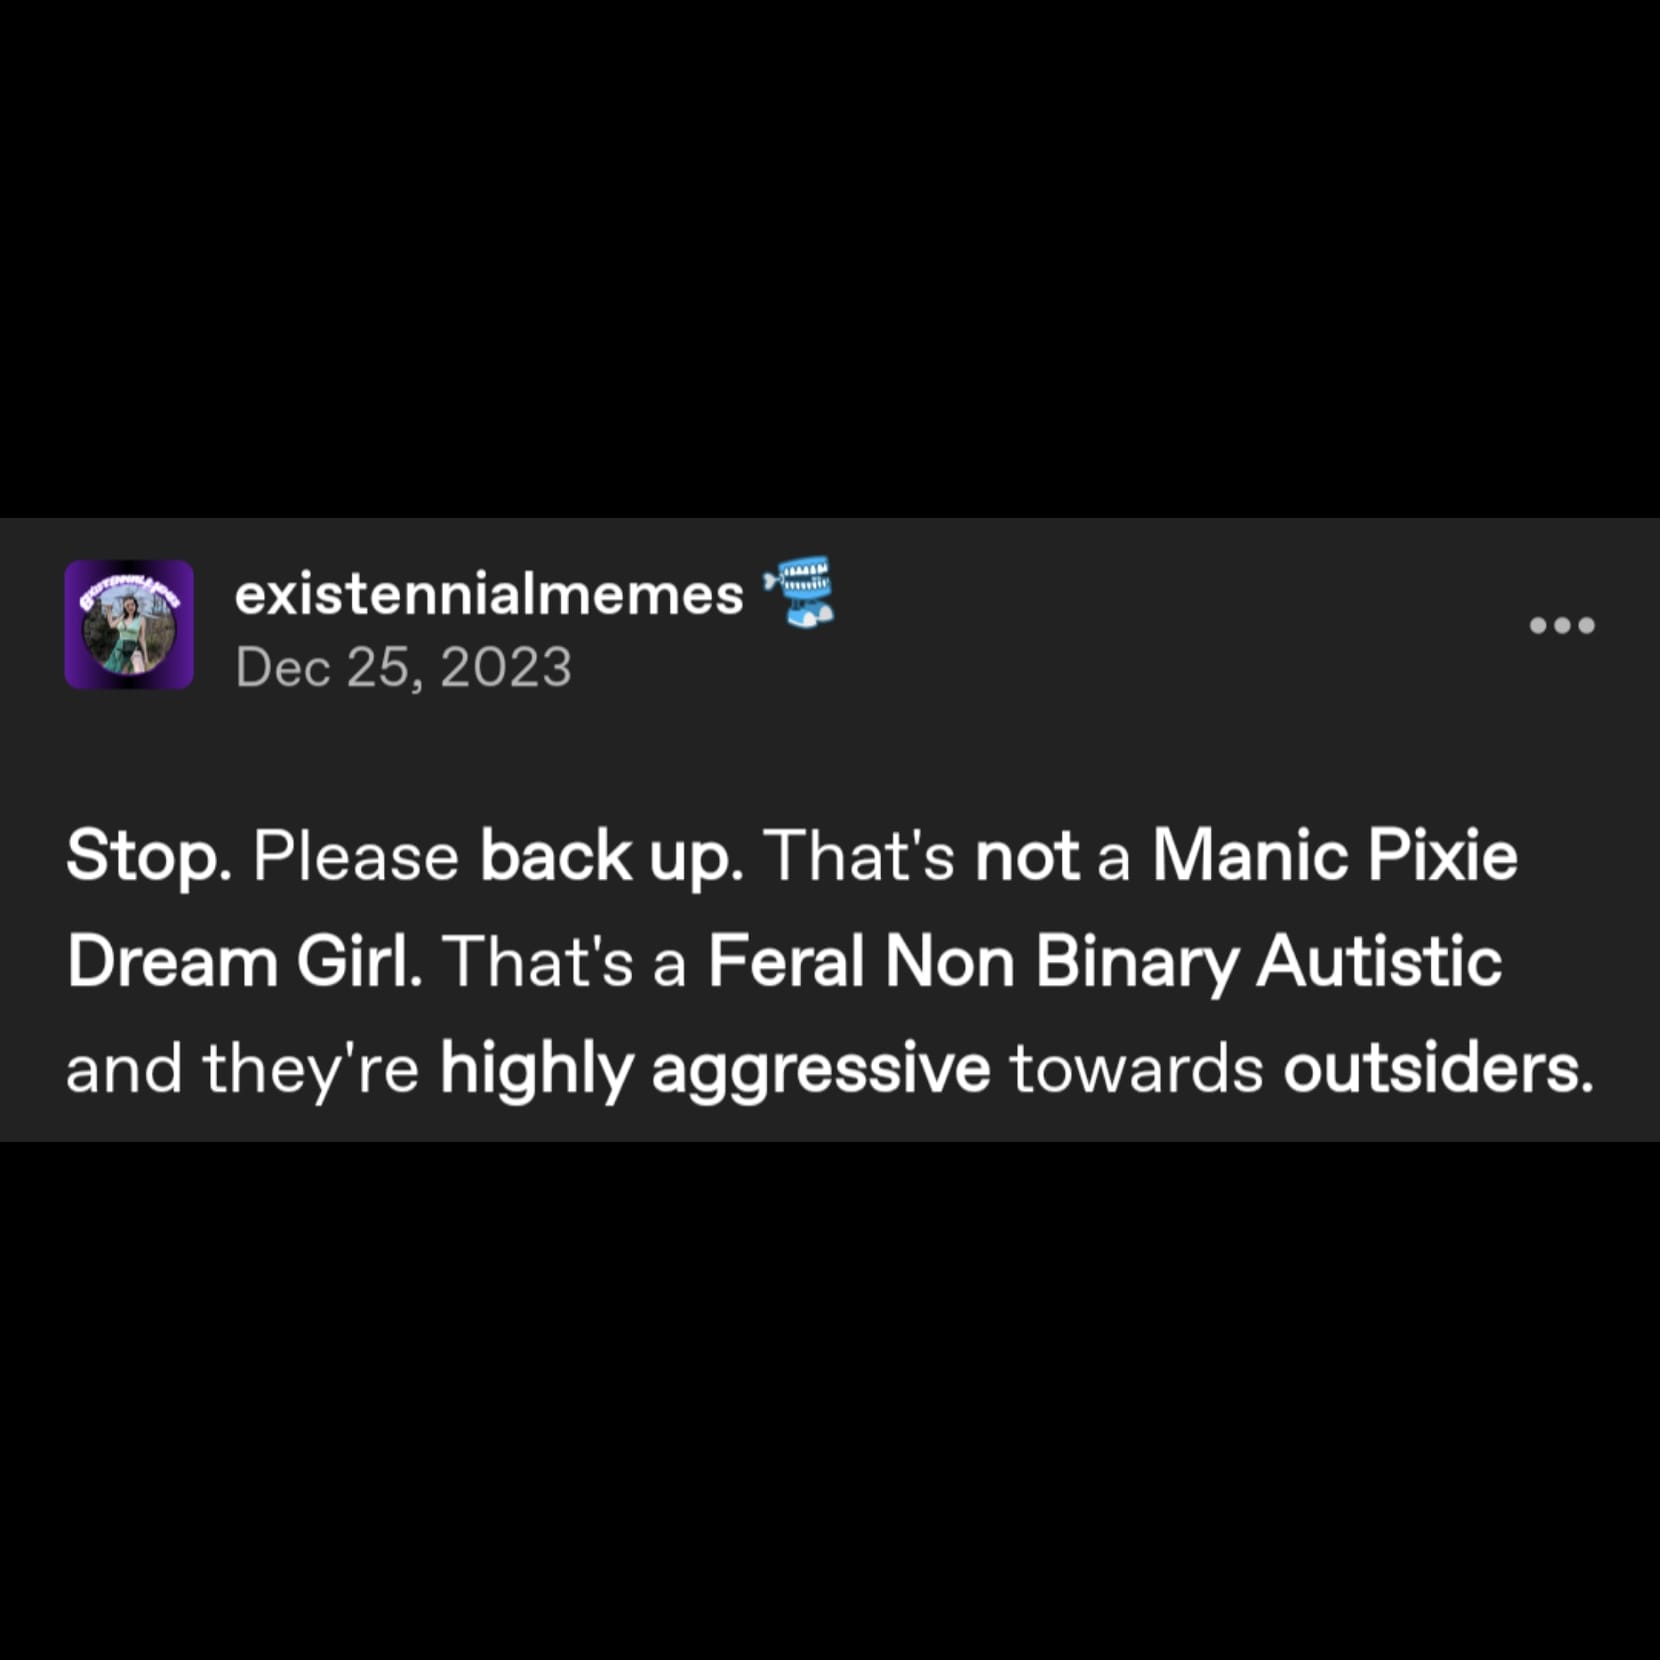 a tumblr post by user existennialmemes that reads: Stop. Please back up. That's not a Manic Pixie Dream Girl. That's a Feral Non Binary Autistic and they're highly aggressive towards outsiders.